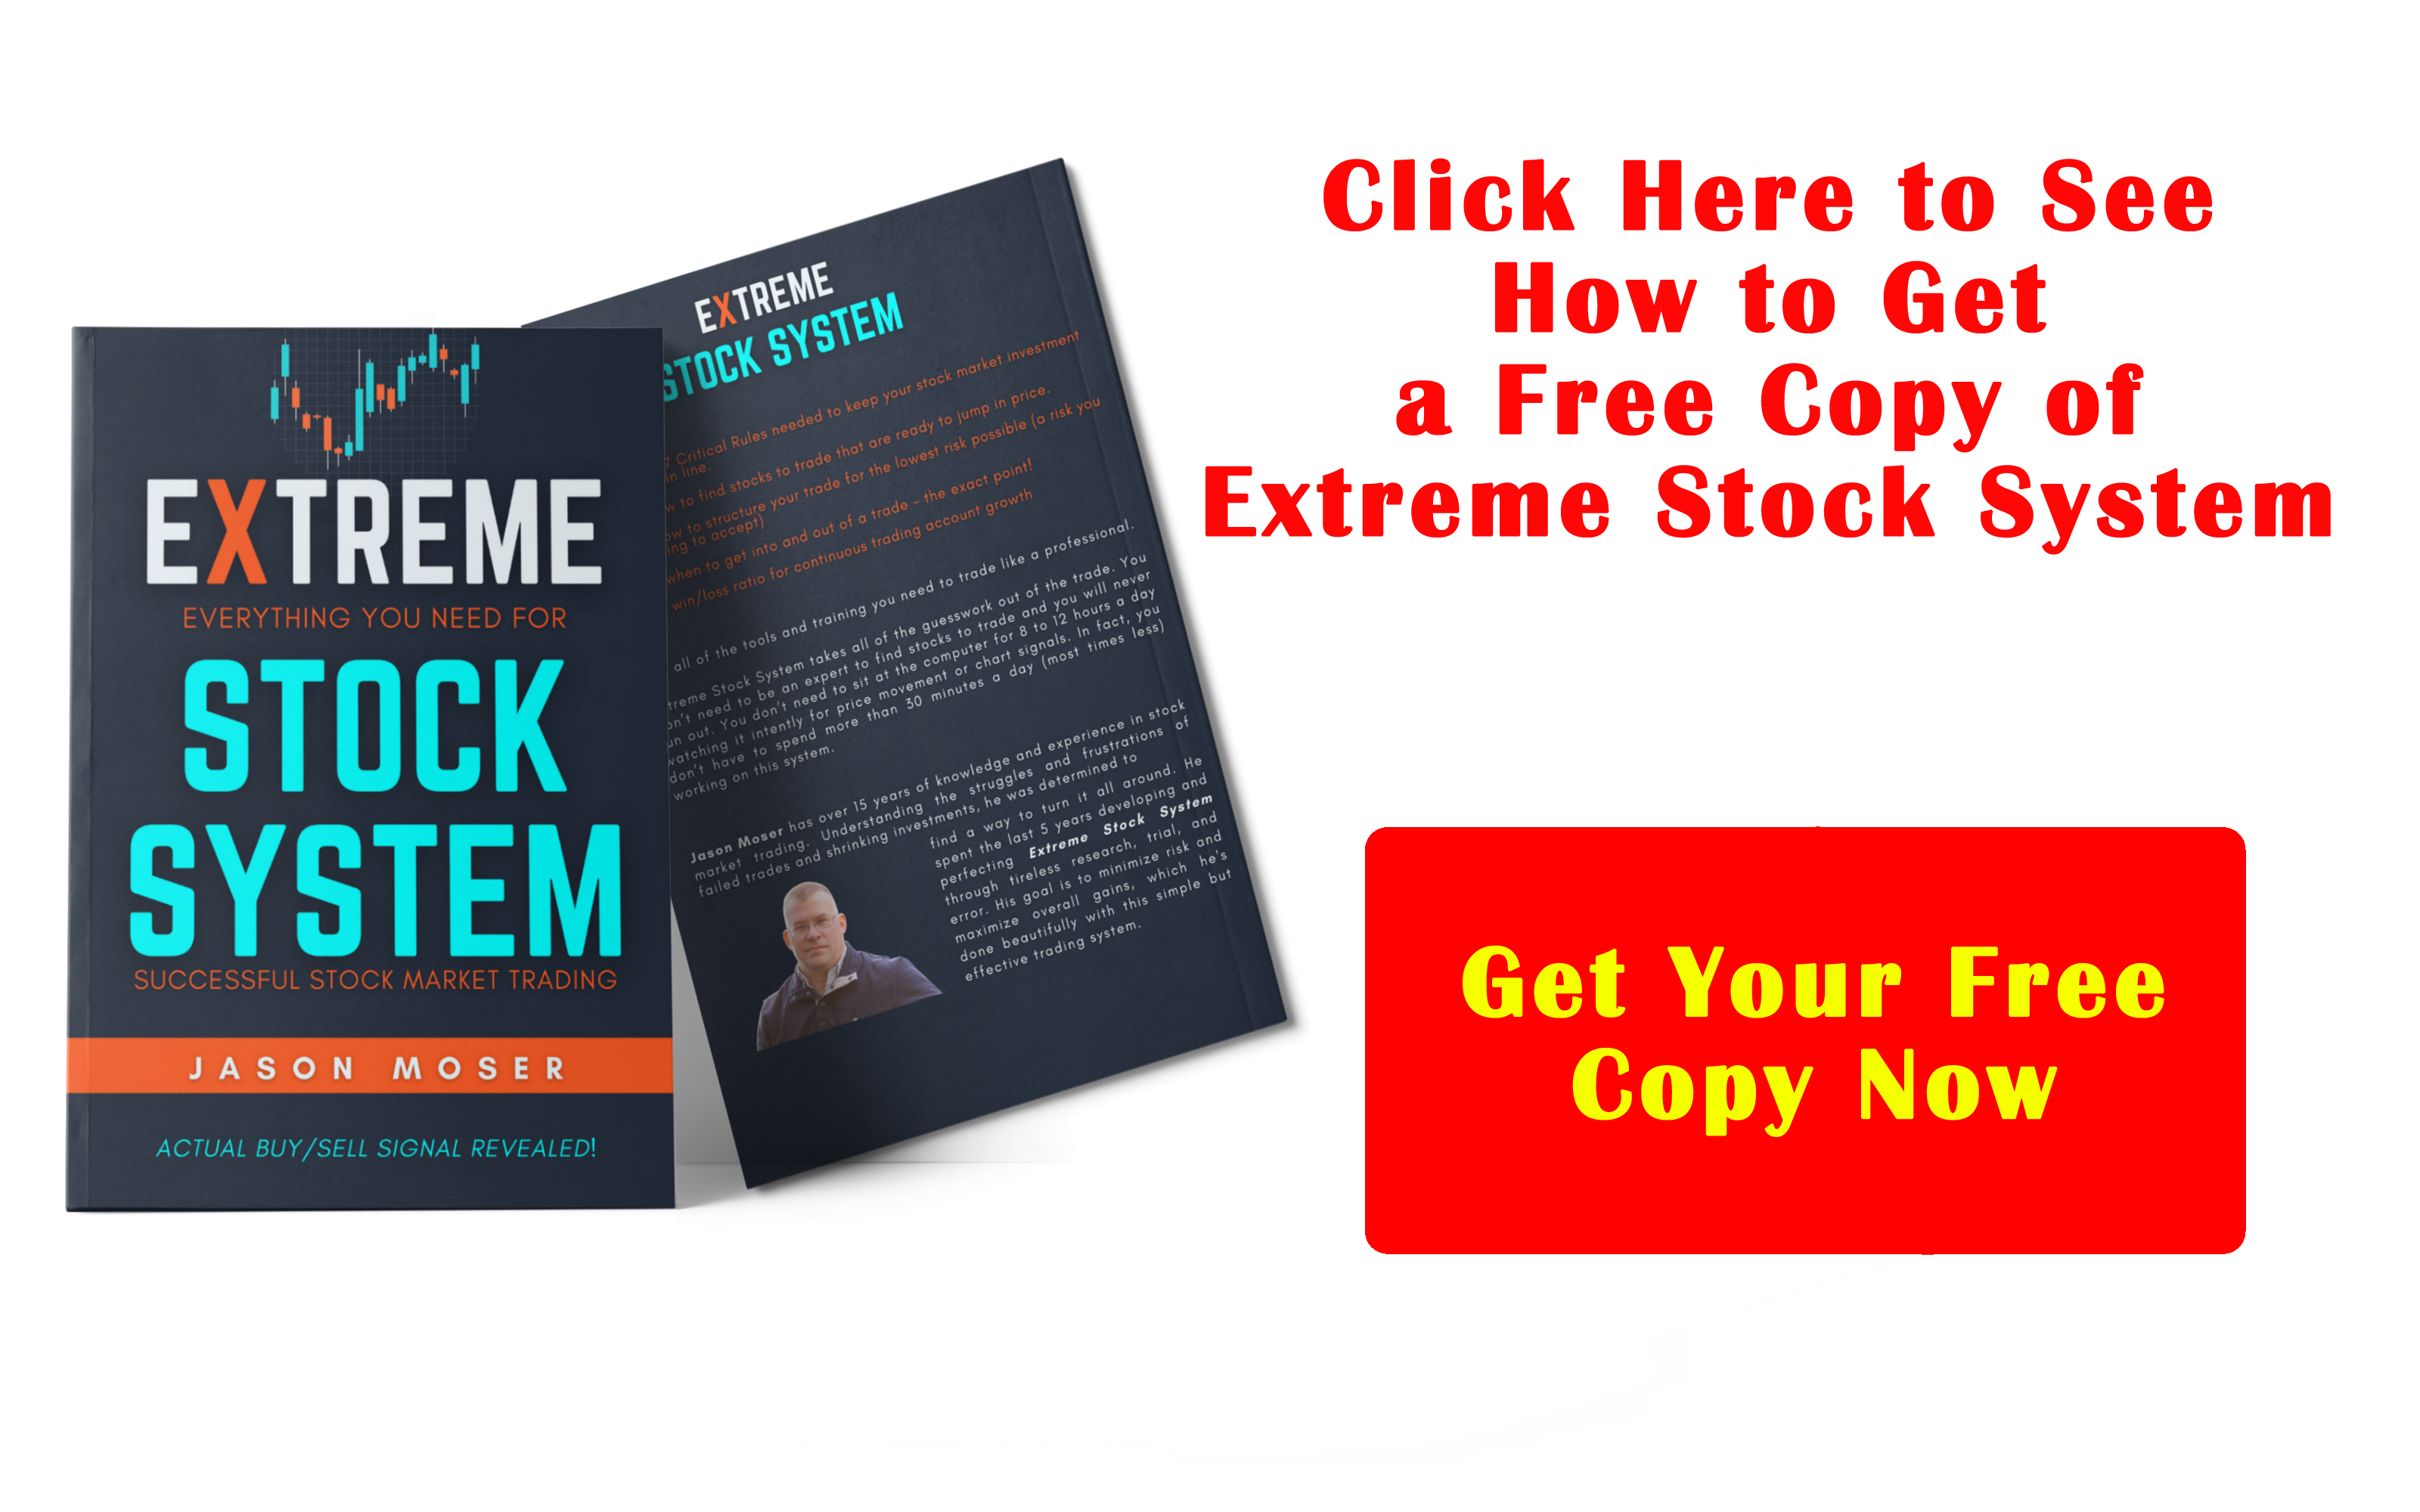 Click for Your Chance for a Free Copy of Extreme Stock System.